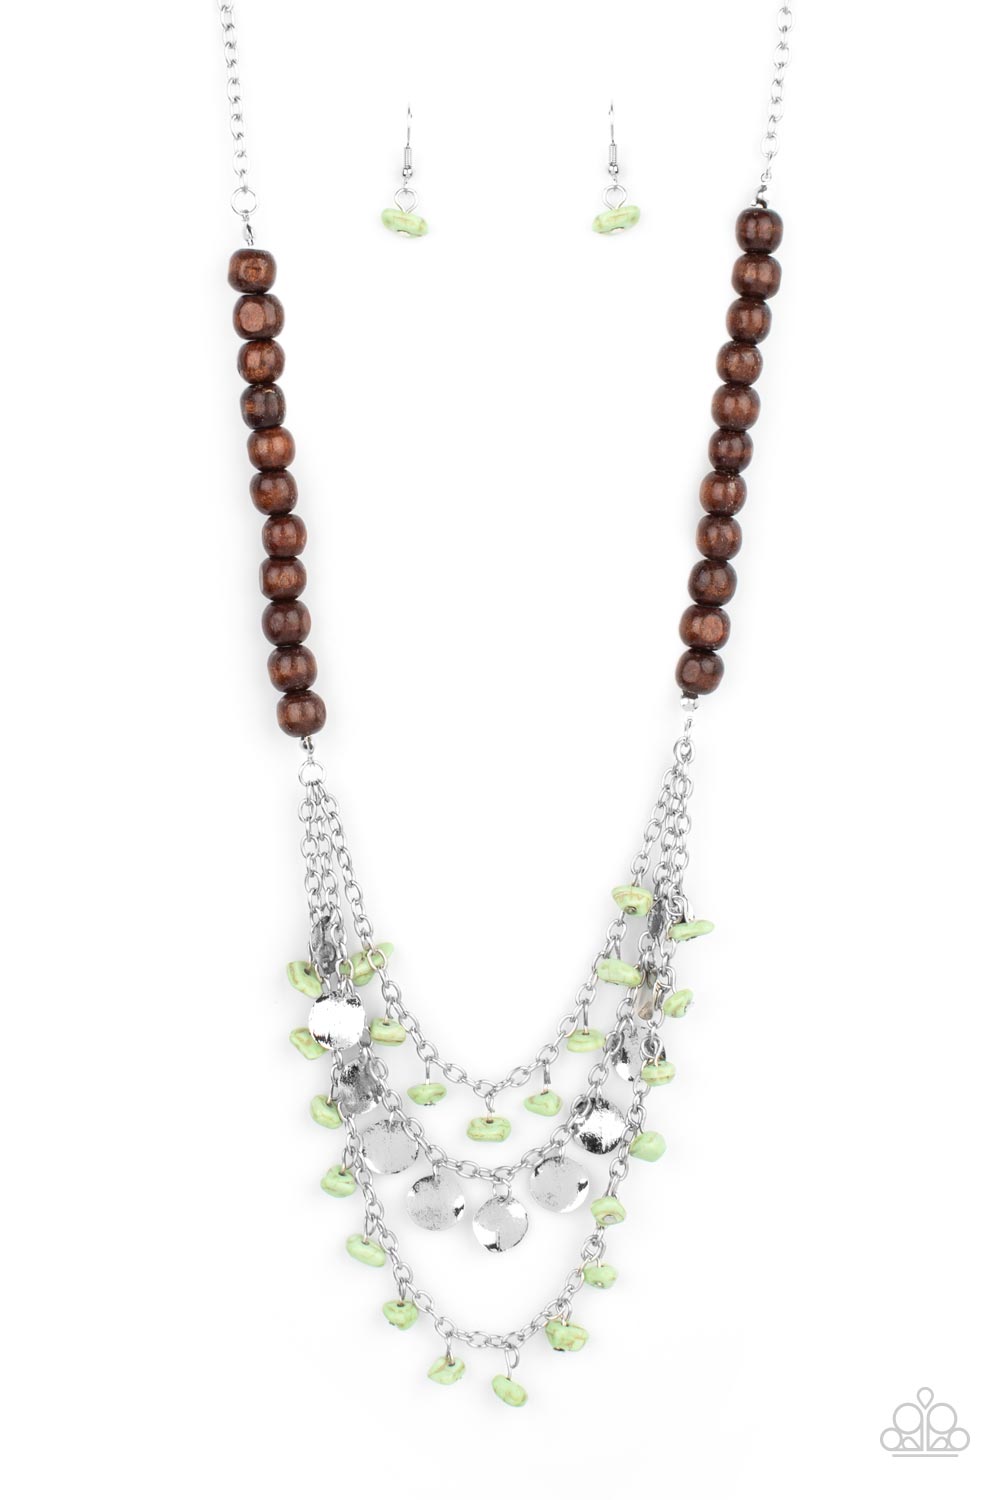 Adorned with green pebbles and hammered silver discs, three silver chains layer from strands of brown wooden beads, creating an earthy fringe below the collar. Features an adjustable clasp closure.